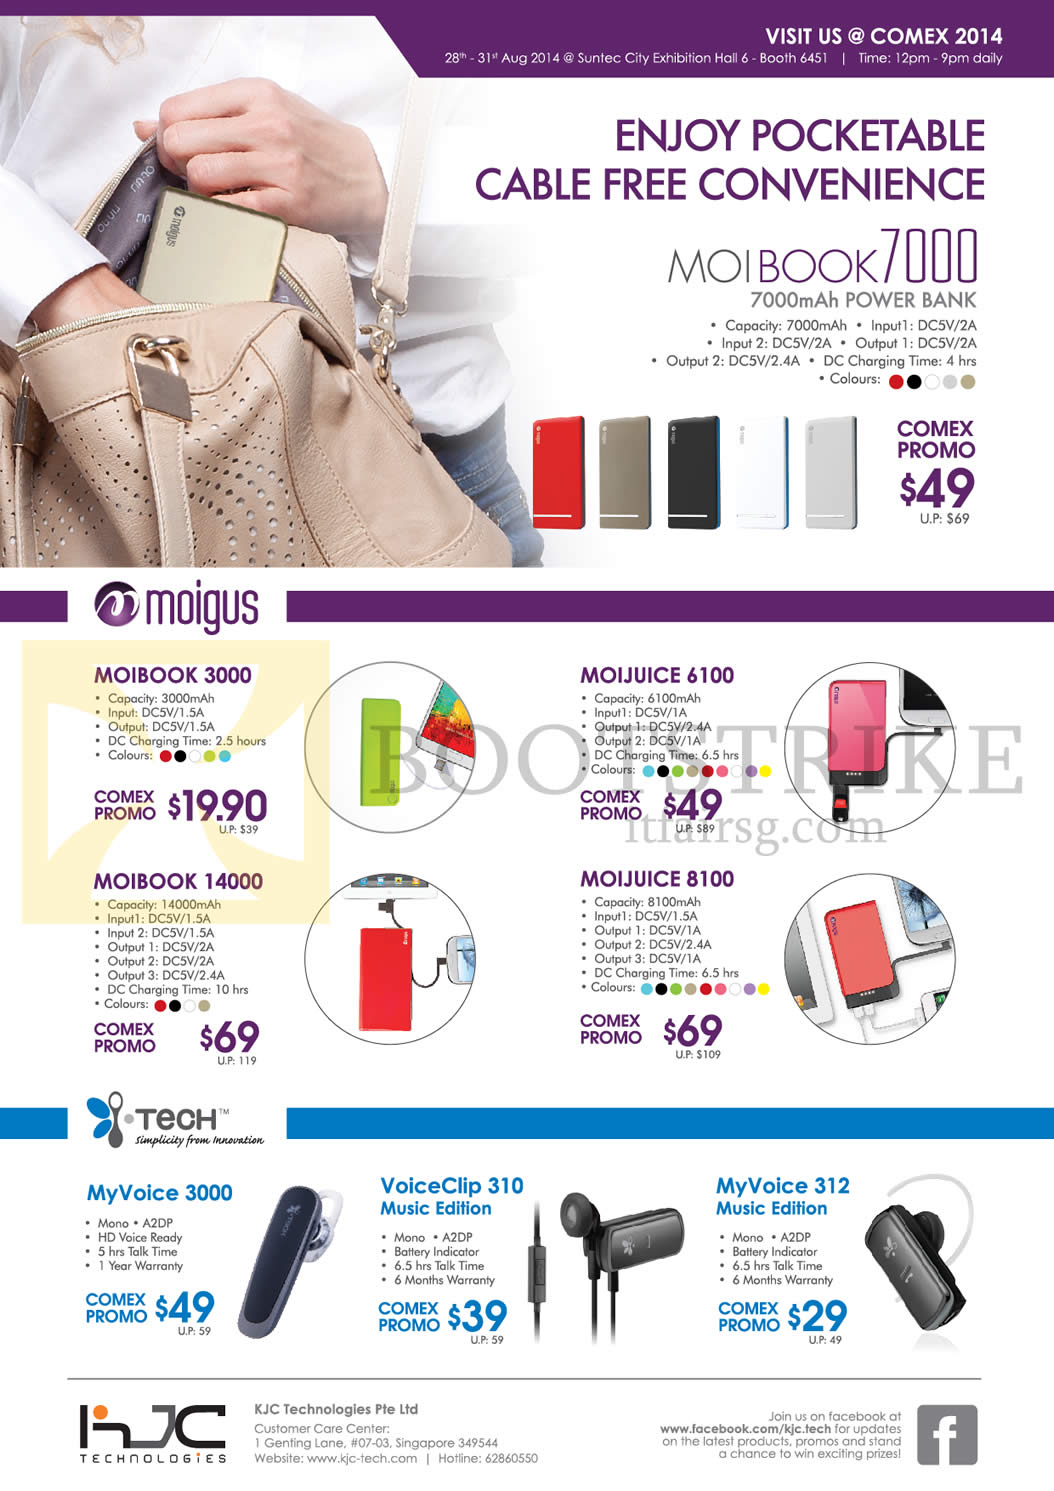 COMEX 2014 price list image brochure of KJC Technologies ITech Bluetooth Headsets, Moigus Power Bank, MyVoice 3000, 312, VoiceClip 310, Moibook 3000, 14000, Moijuice 6100, 8100